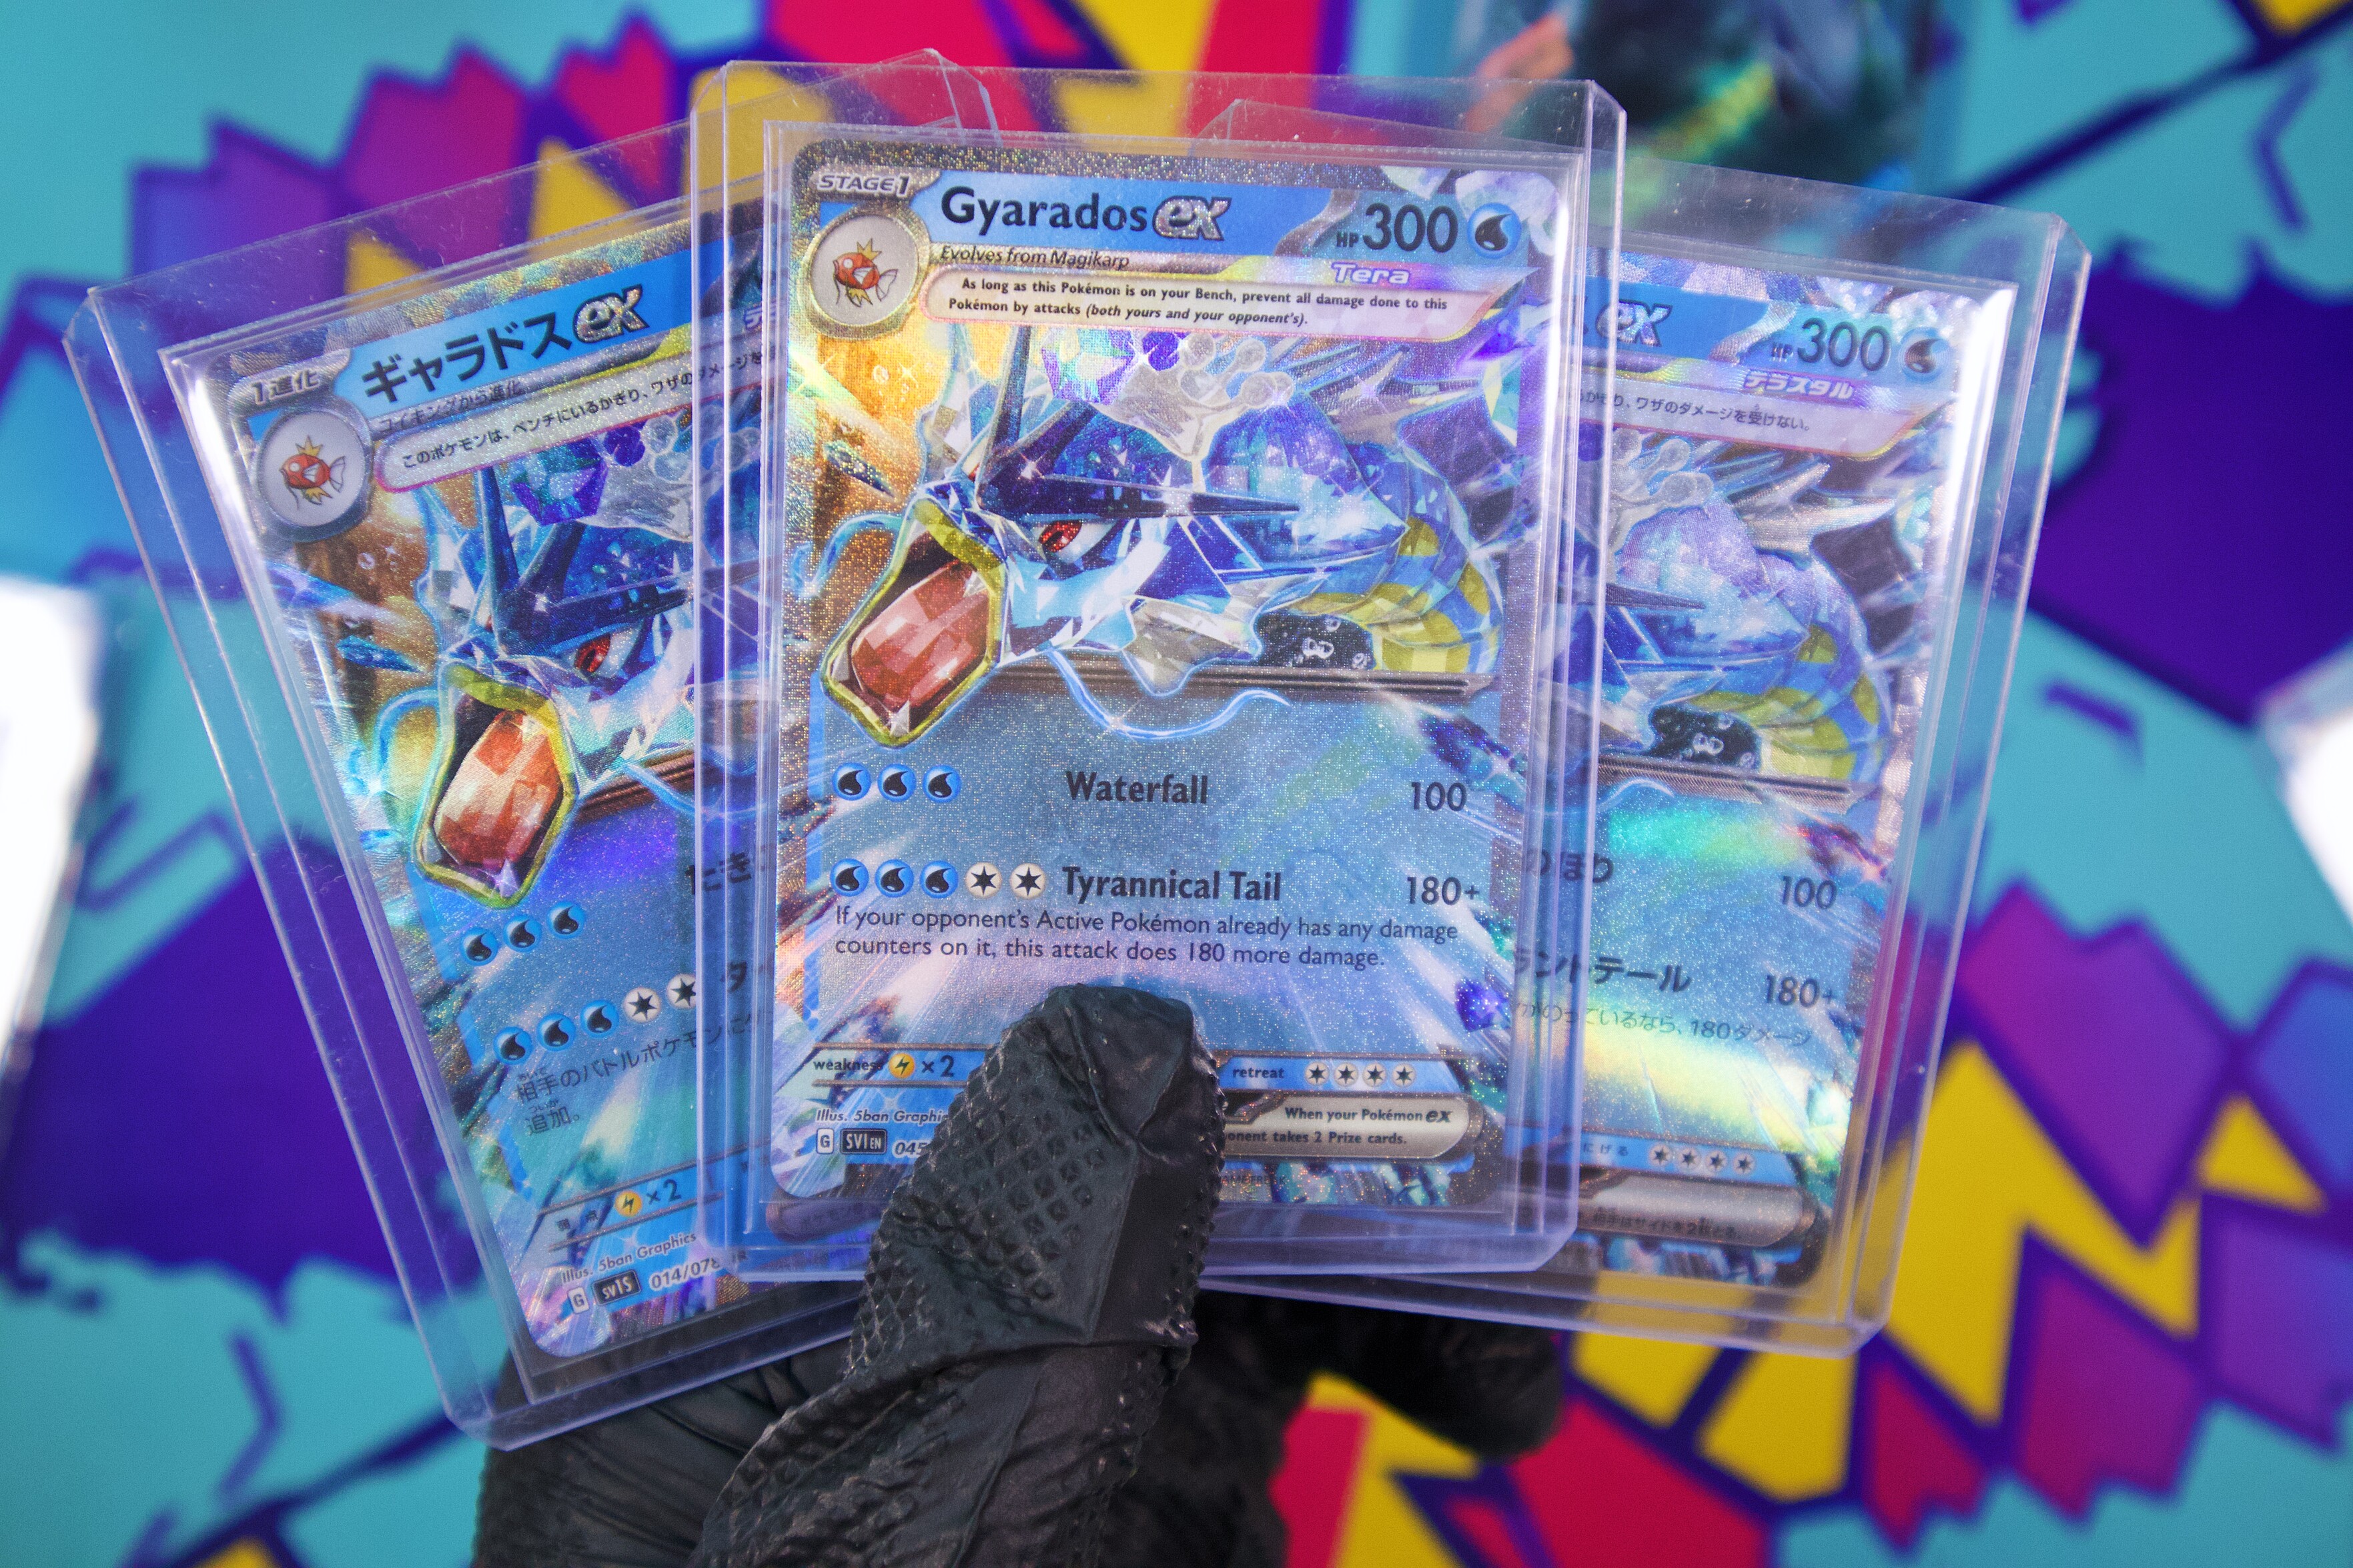 3 Gyarados ex cards from the Pokémon Scarlet & Violet Base Set. Double sleeved and toploaded.